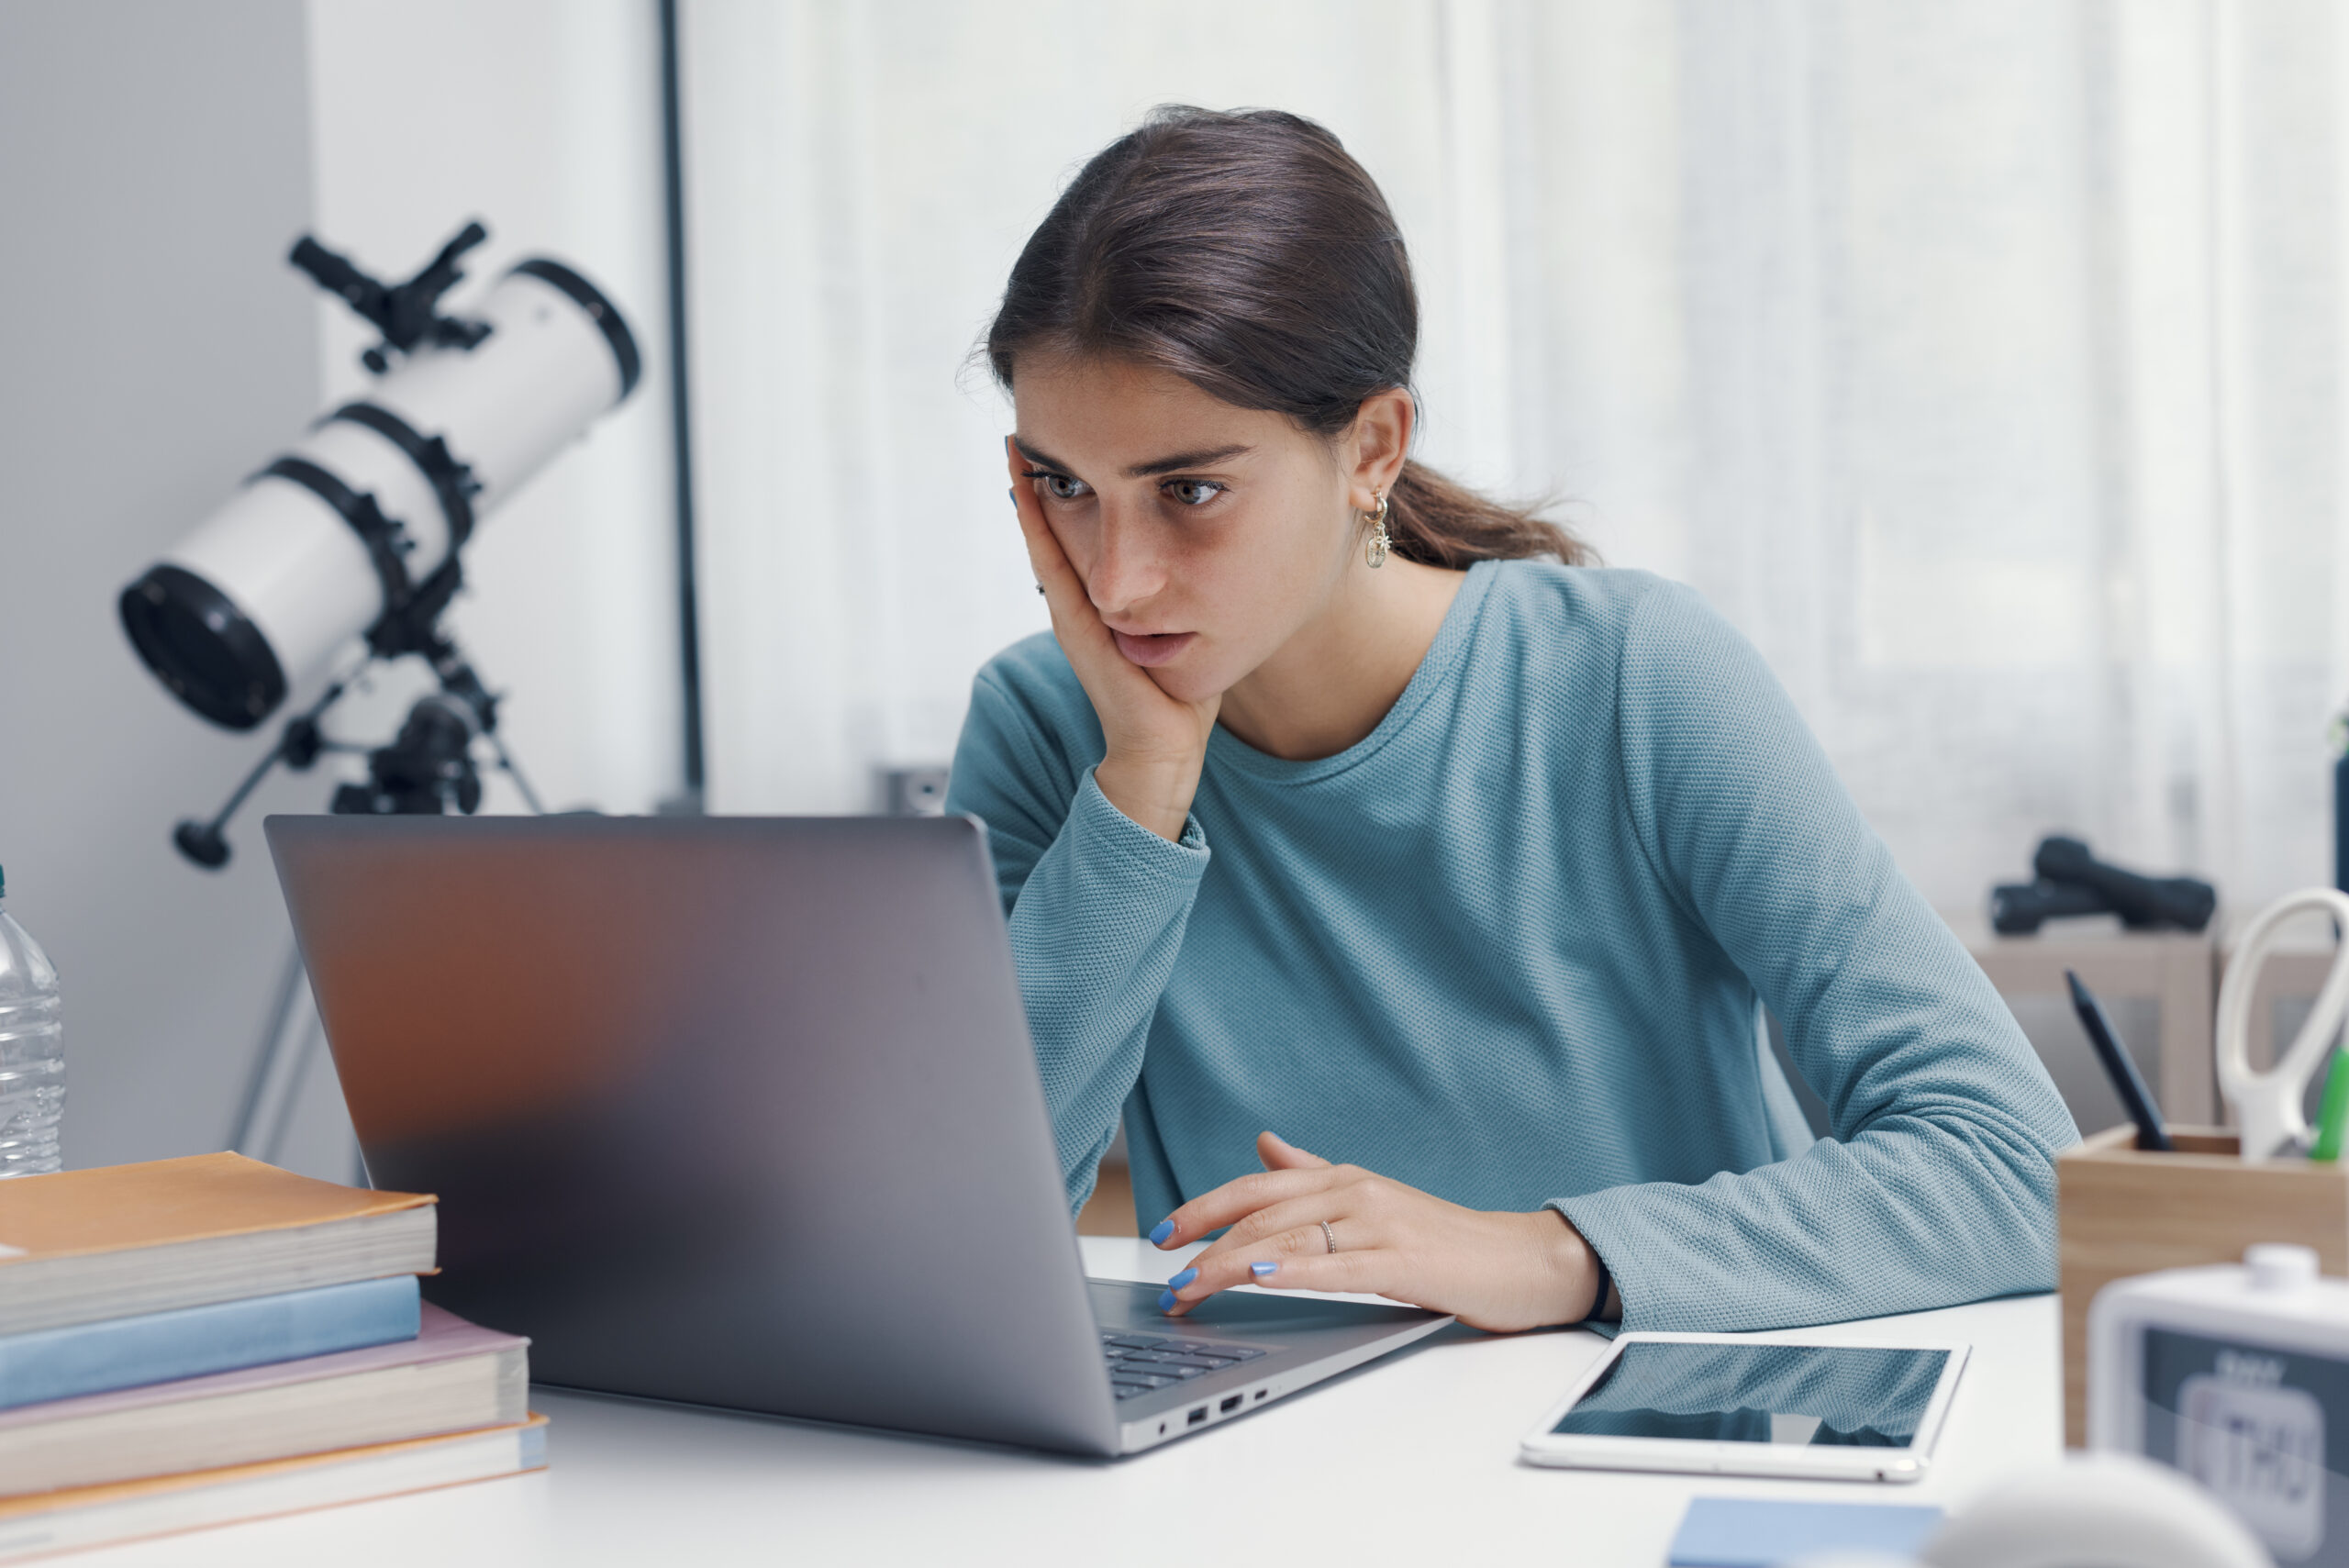 Upset young woman looking at her laptop